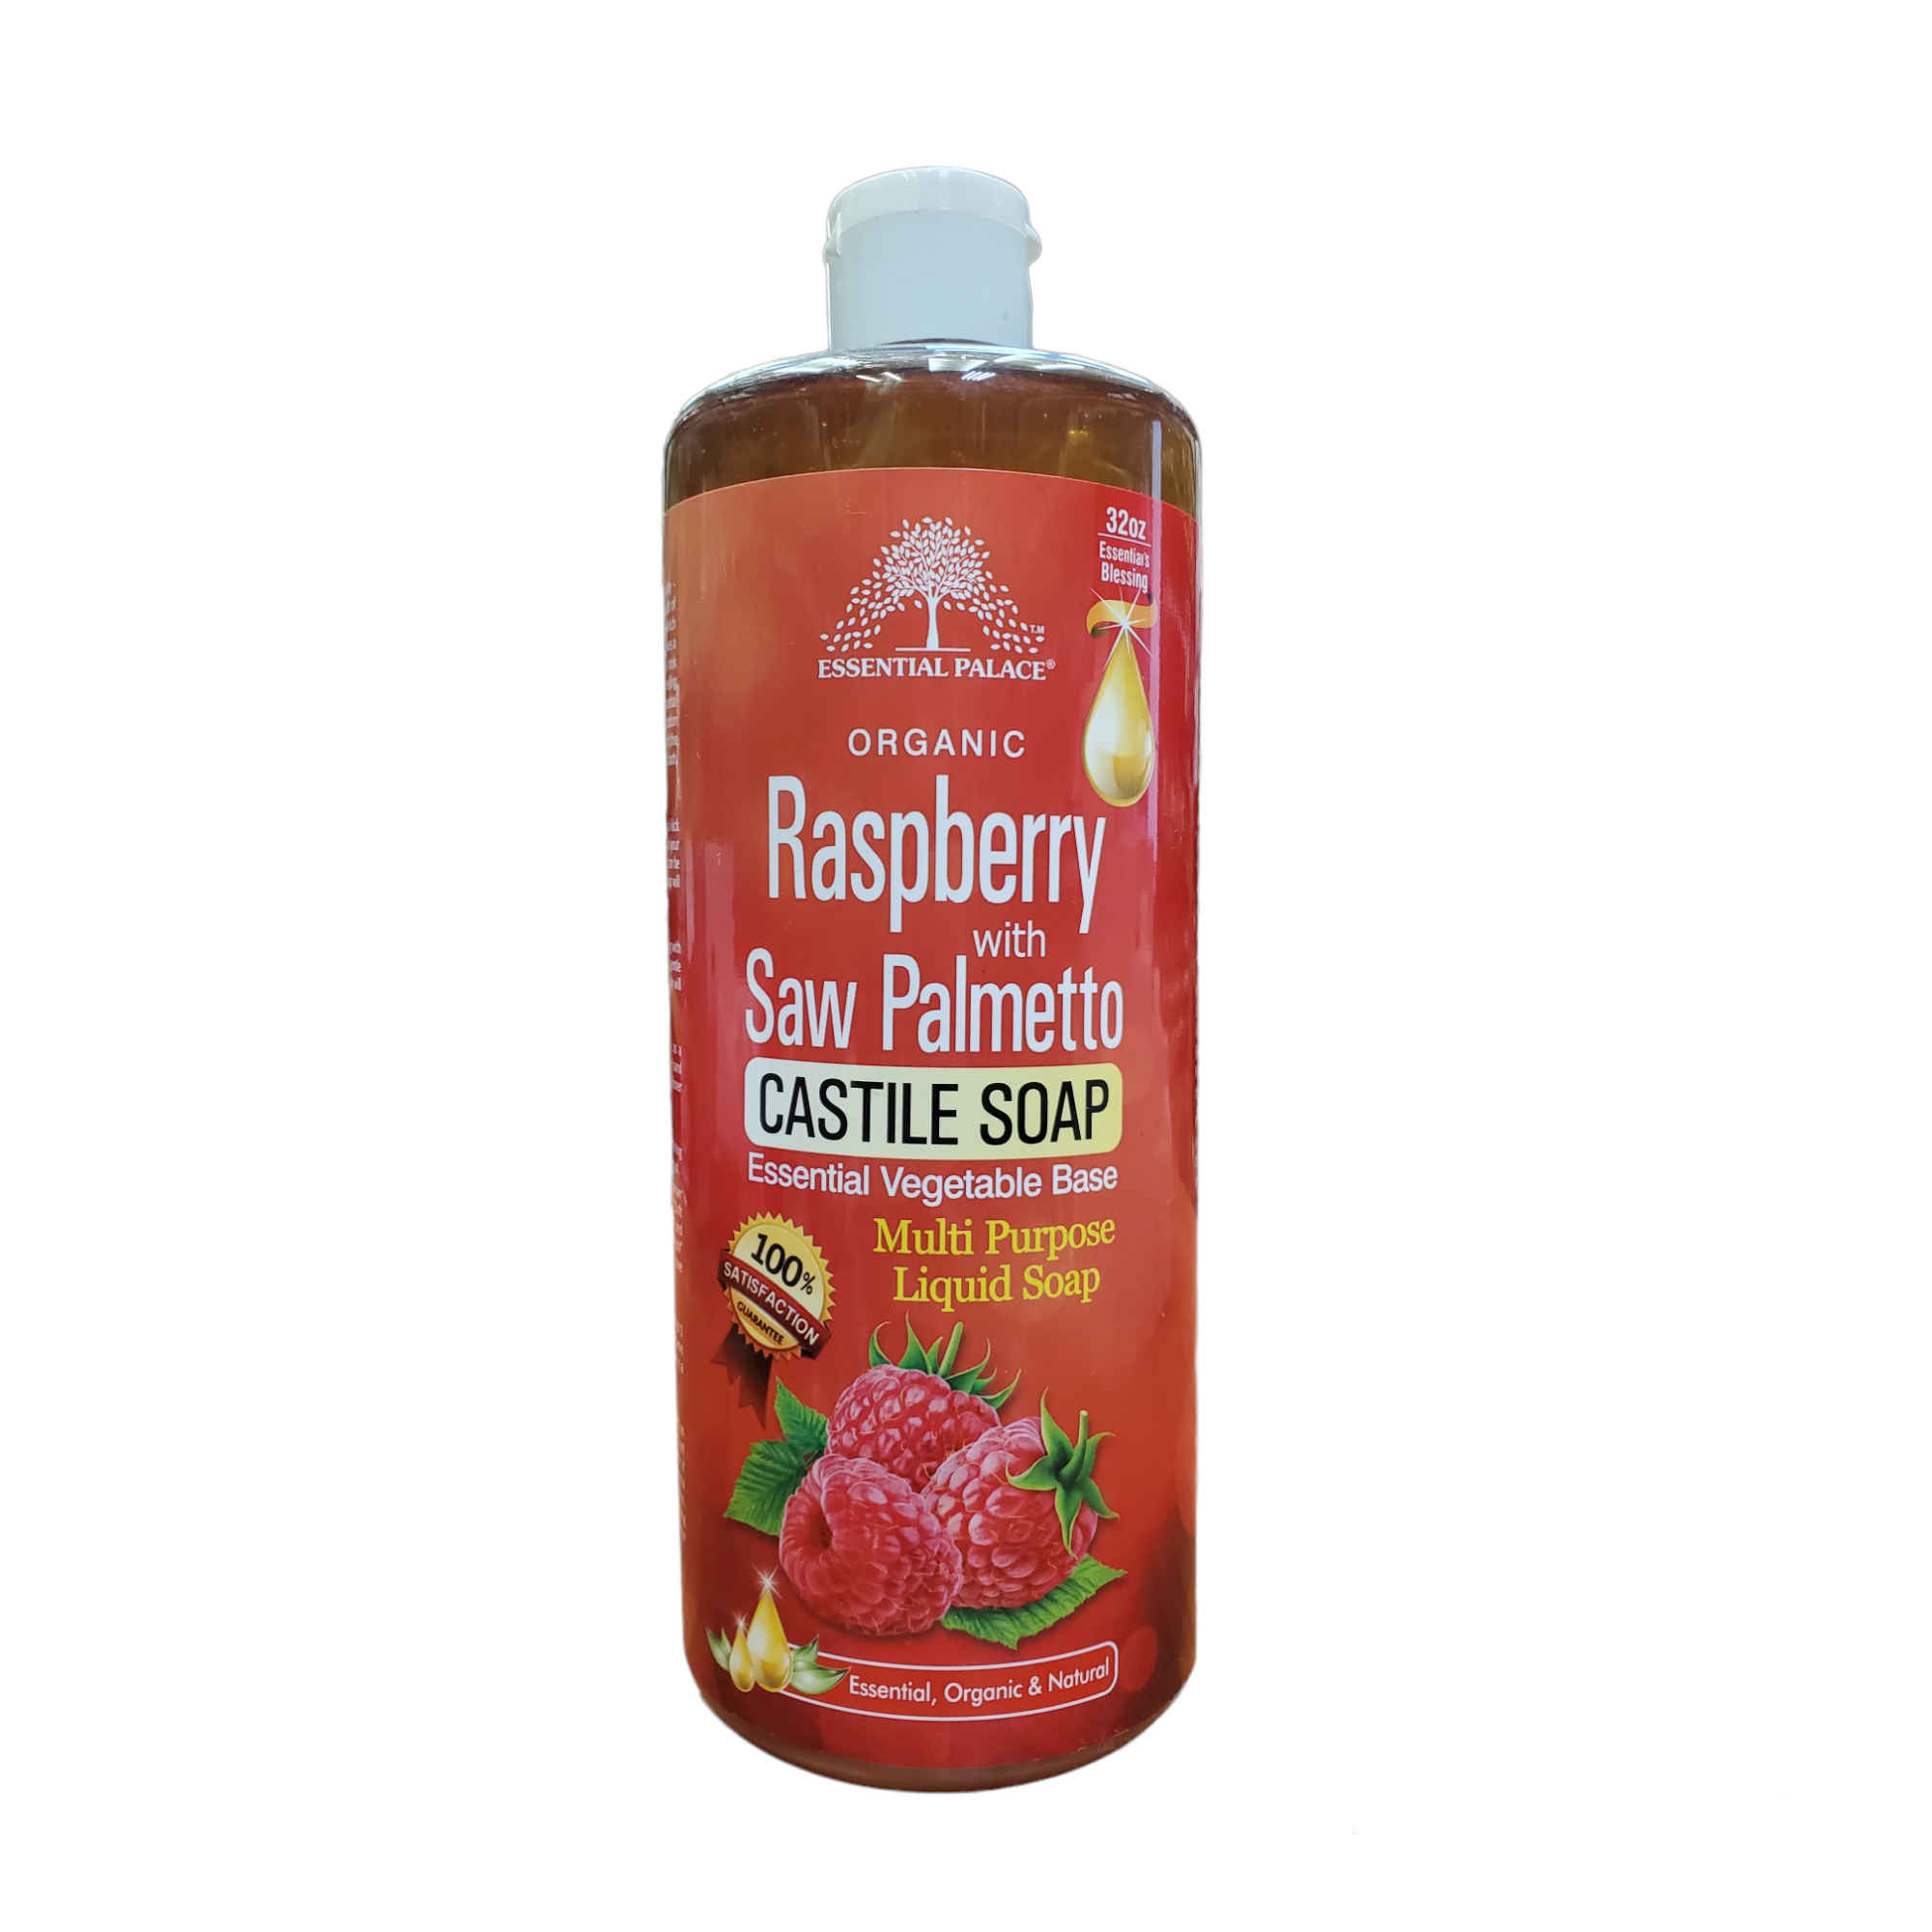 Essential Palace Raspberry Castile Soap with Saw Palmetto 32 OZ Front